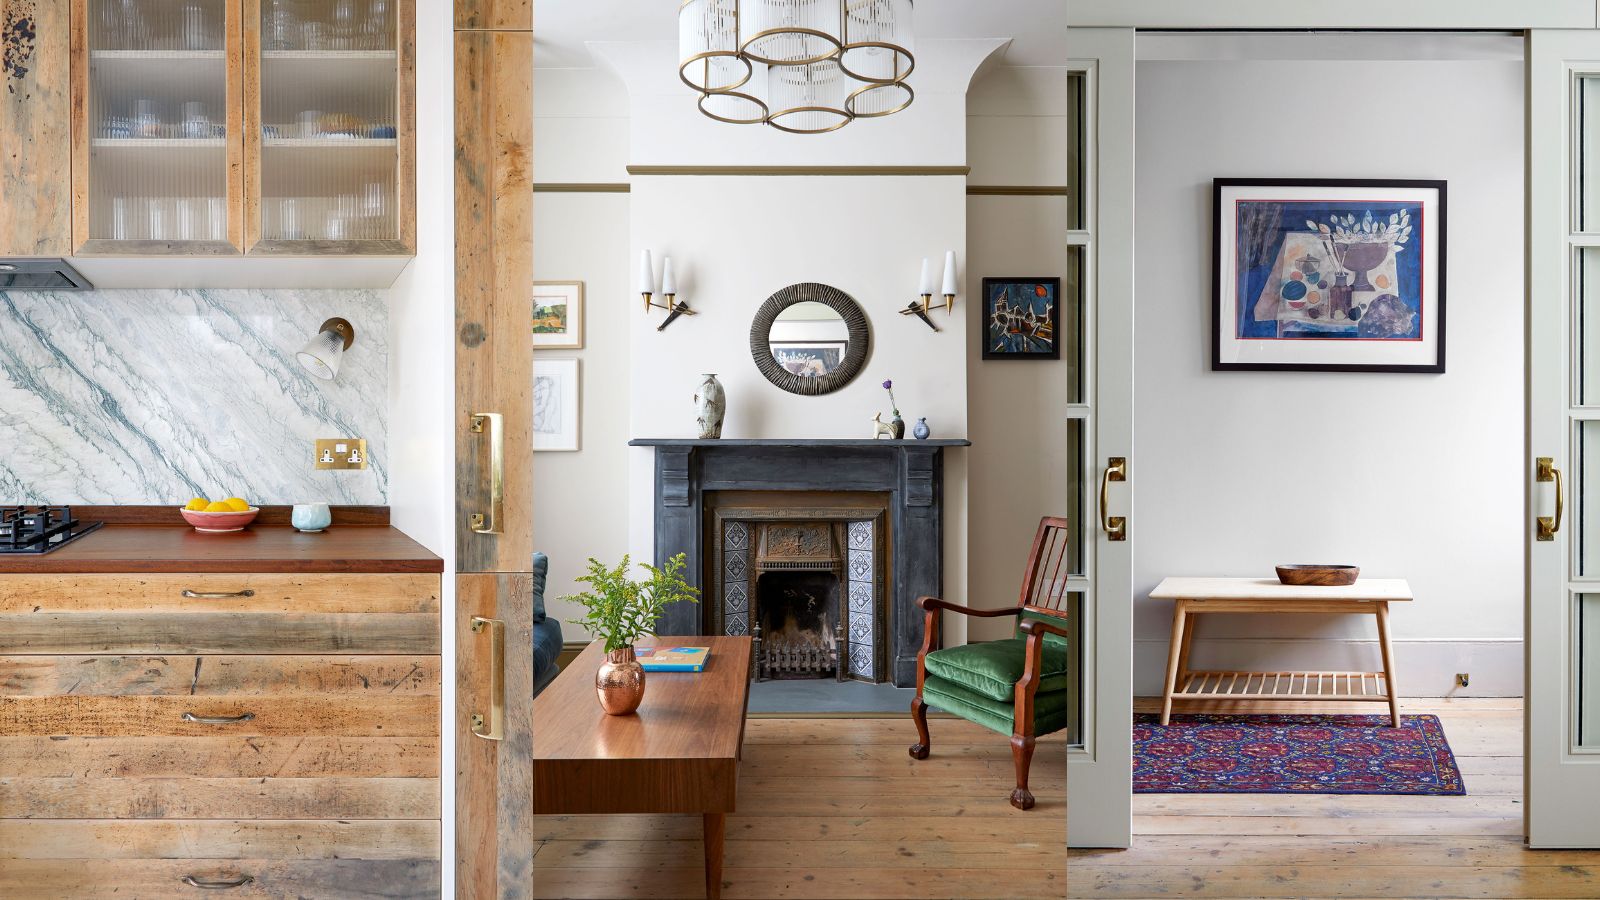 How can I make my small house look beautiful? 8 expert tips |